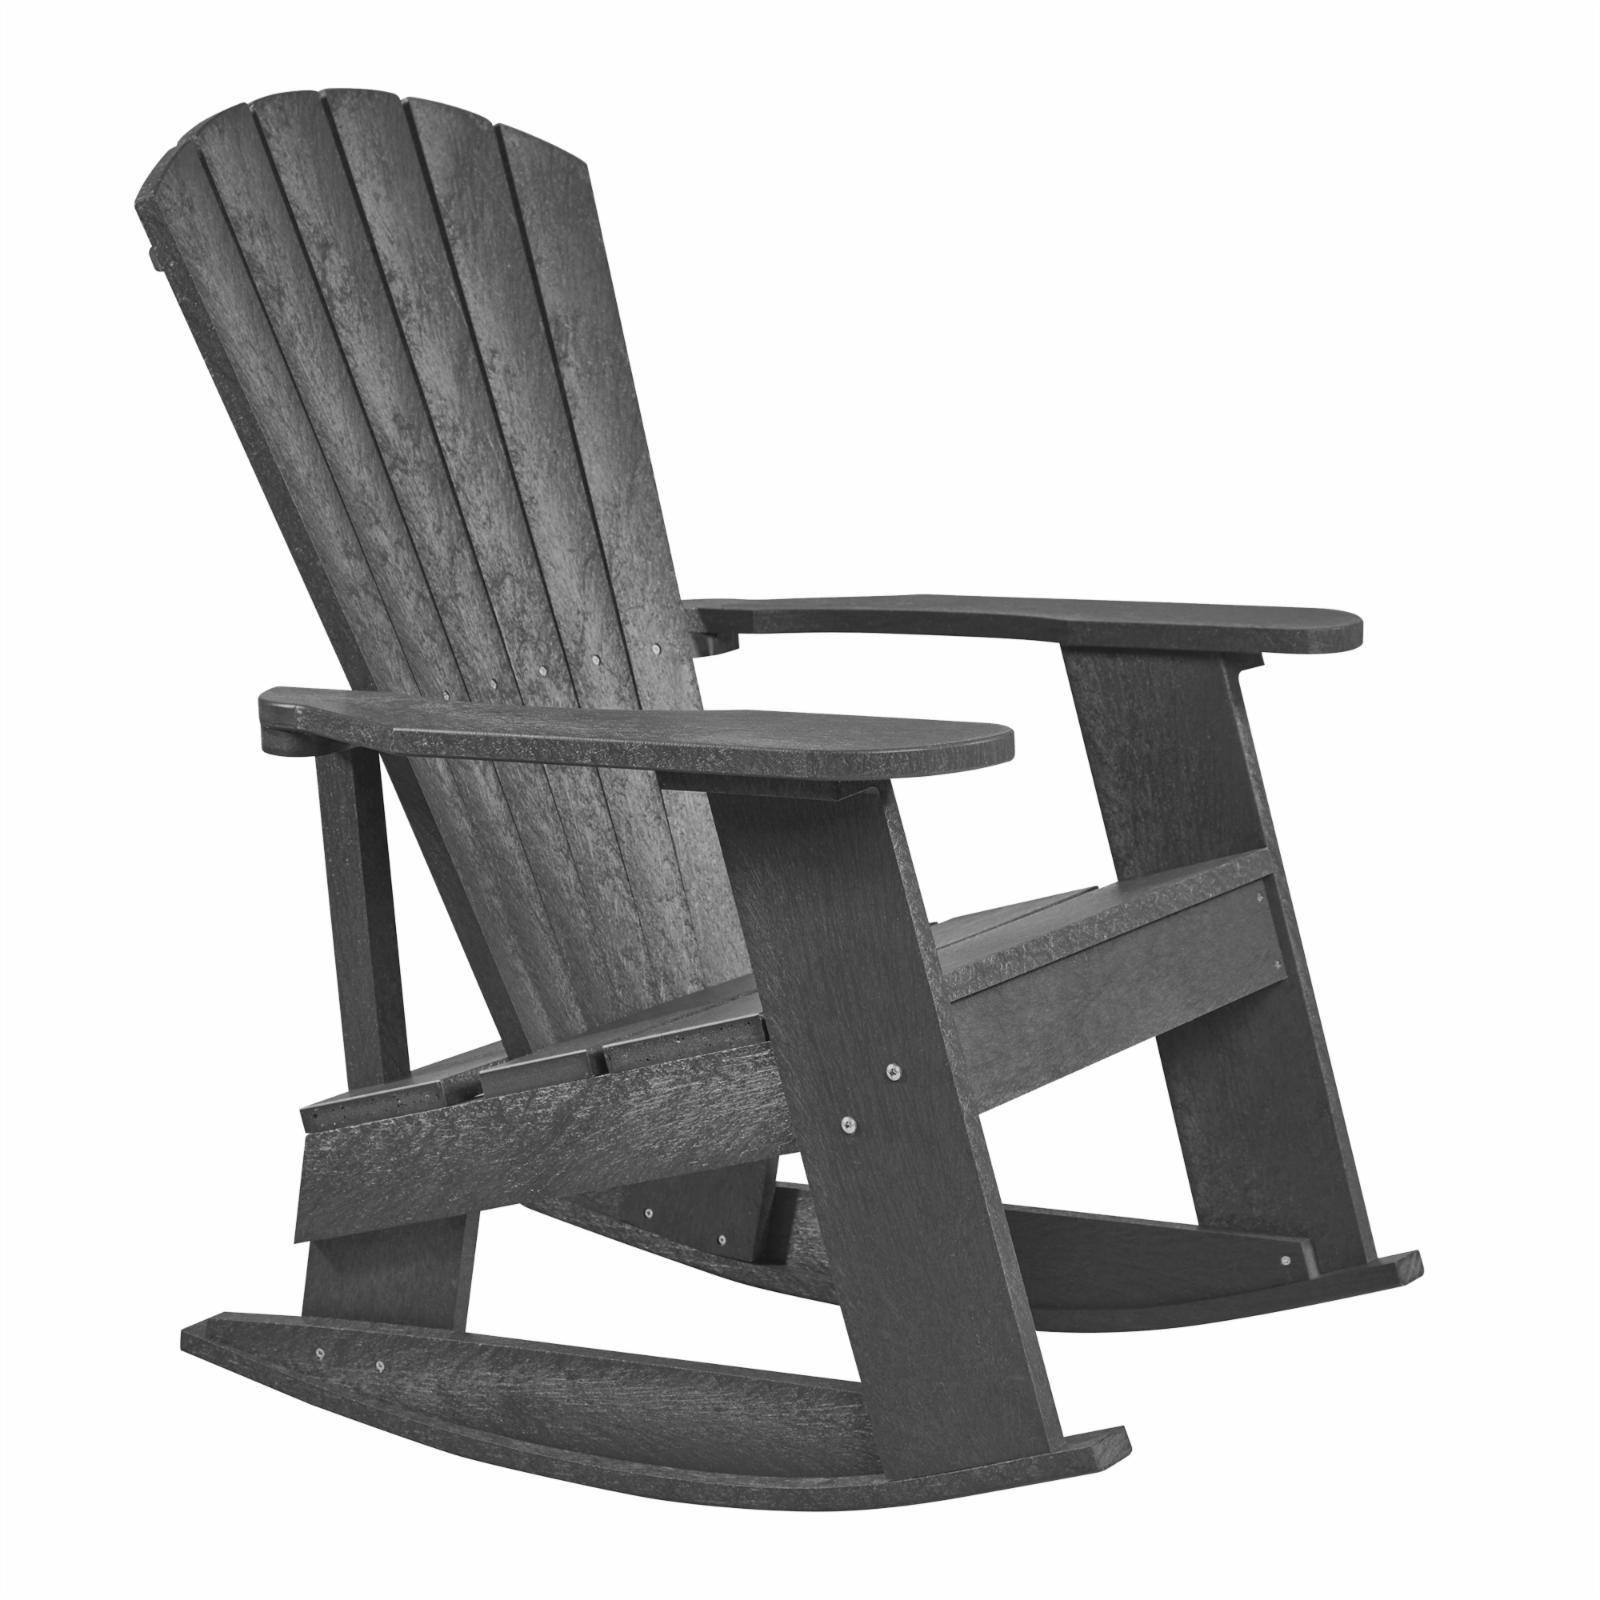 HN Outdoor Logan Recycled Plastic Adirondack Rocking Chair - image 2 of 10